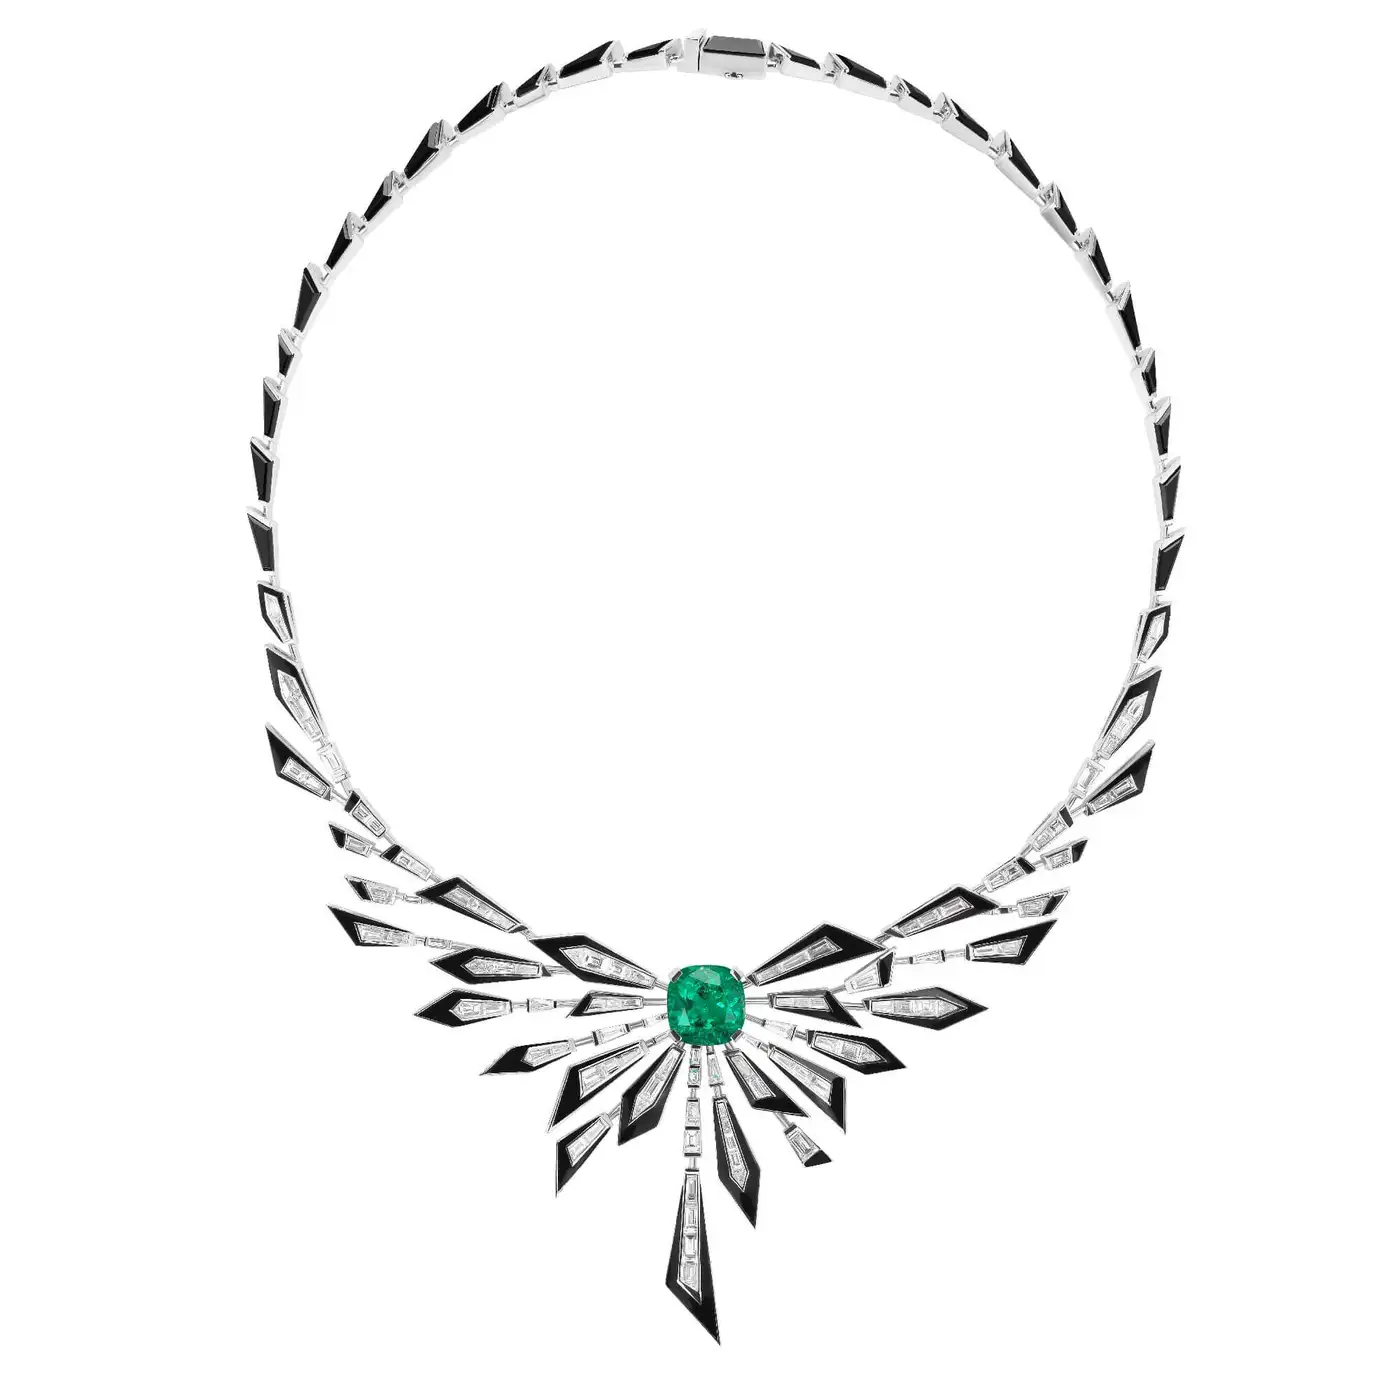 Stephen-Webster-Dynamite-Damage-is-Already-Done-Diamond-and-Emerald-Necklace-6.webp